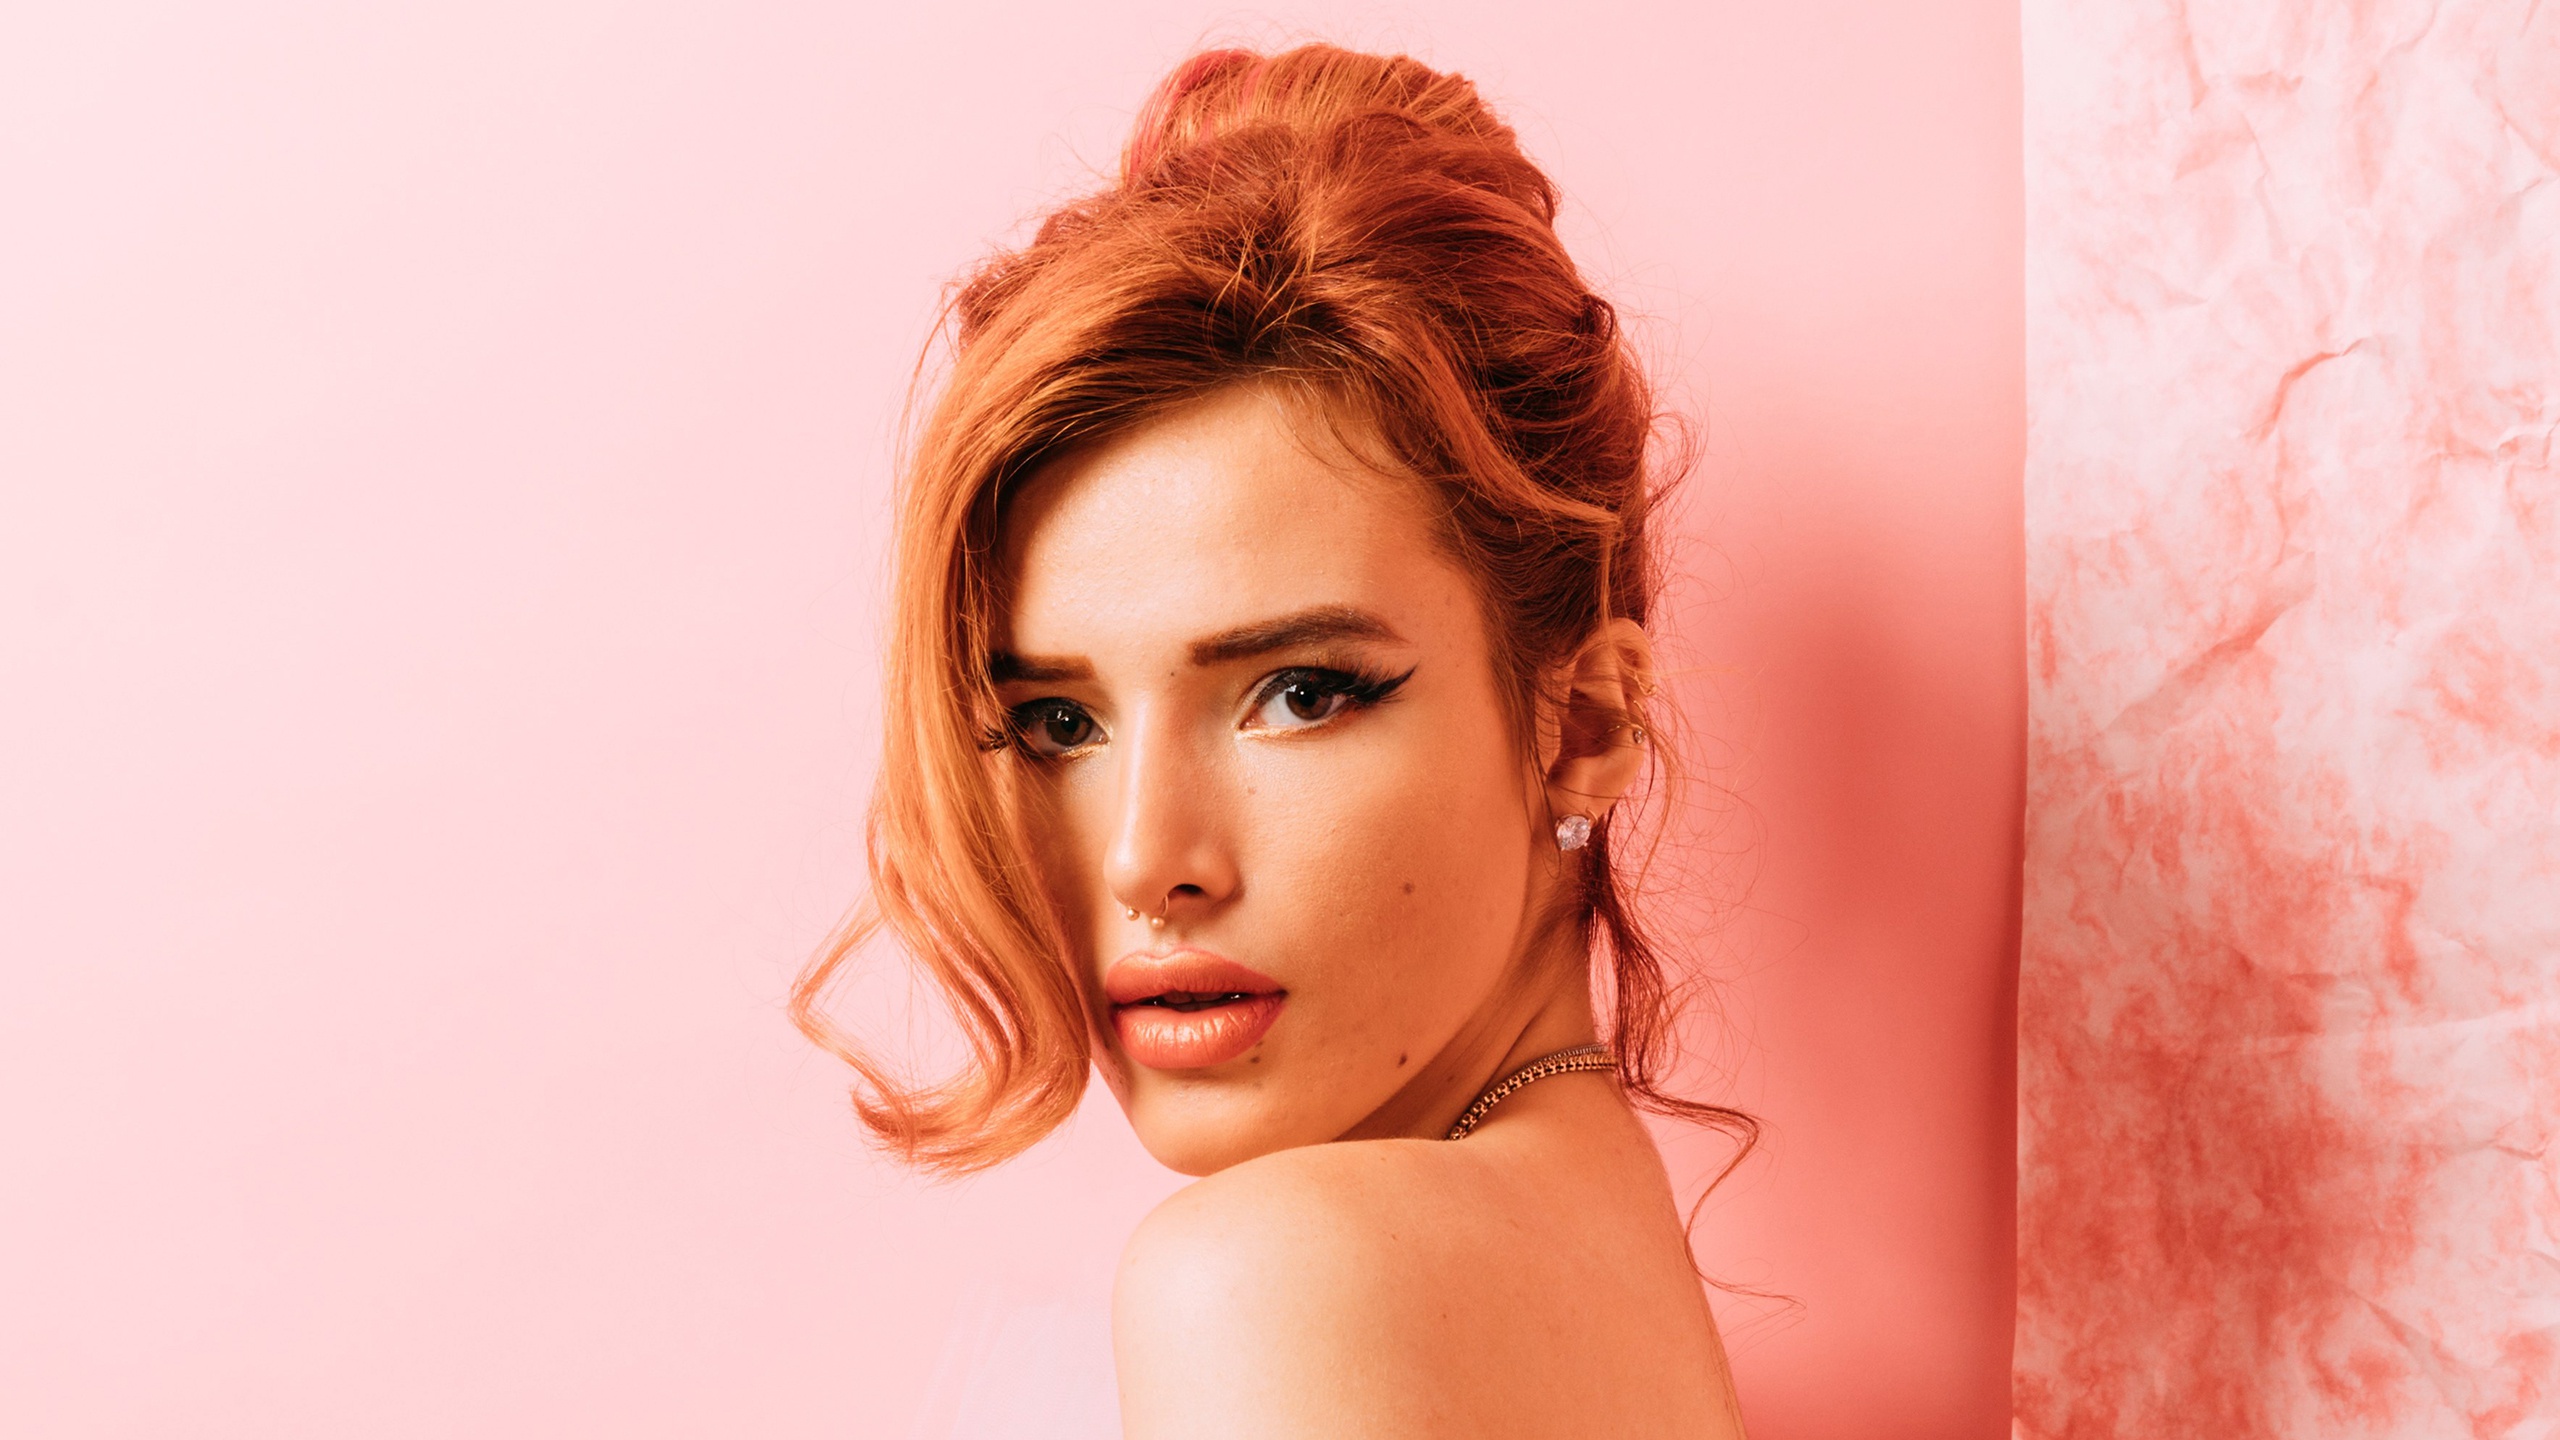 celebrity, bella thorne, actress, american, brown eyes, face, redhead